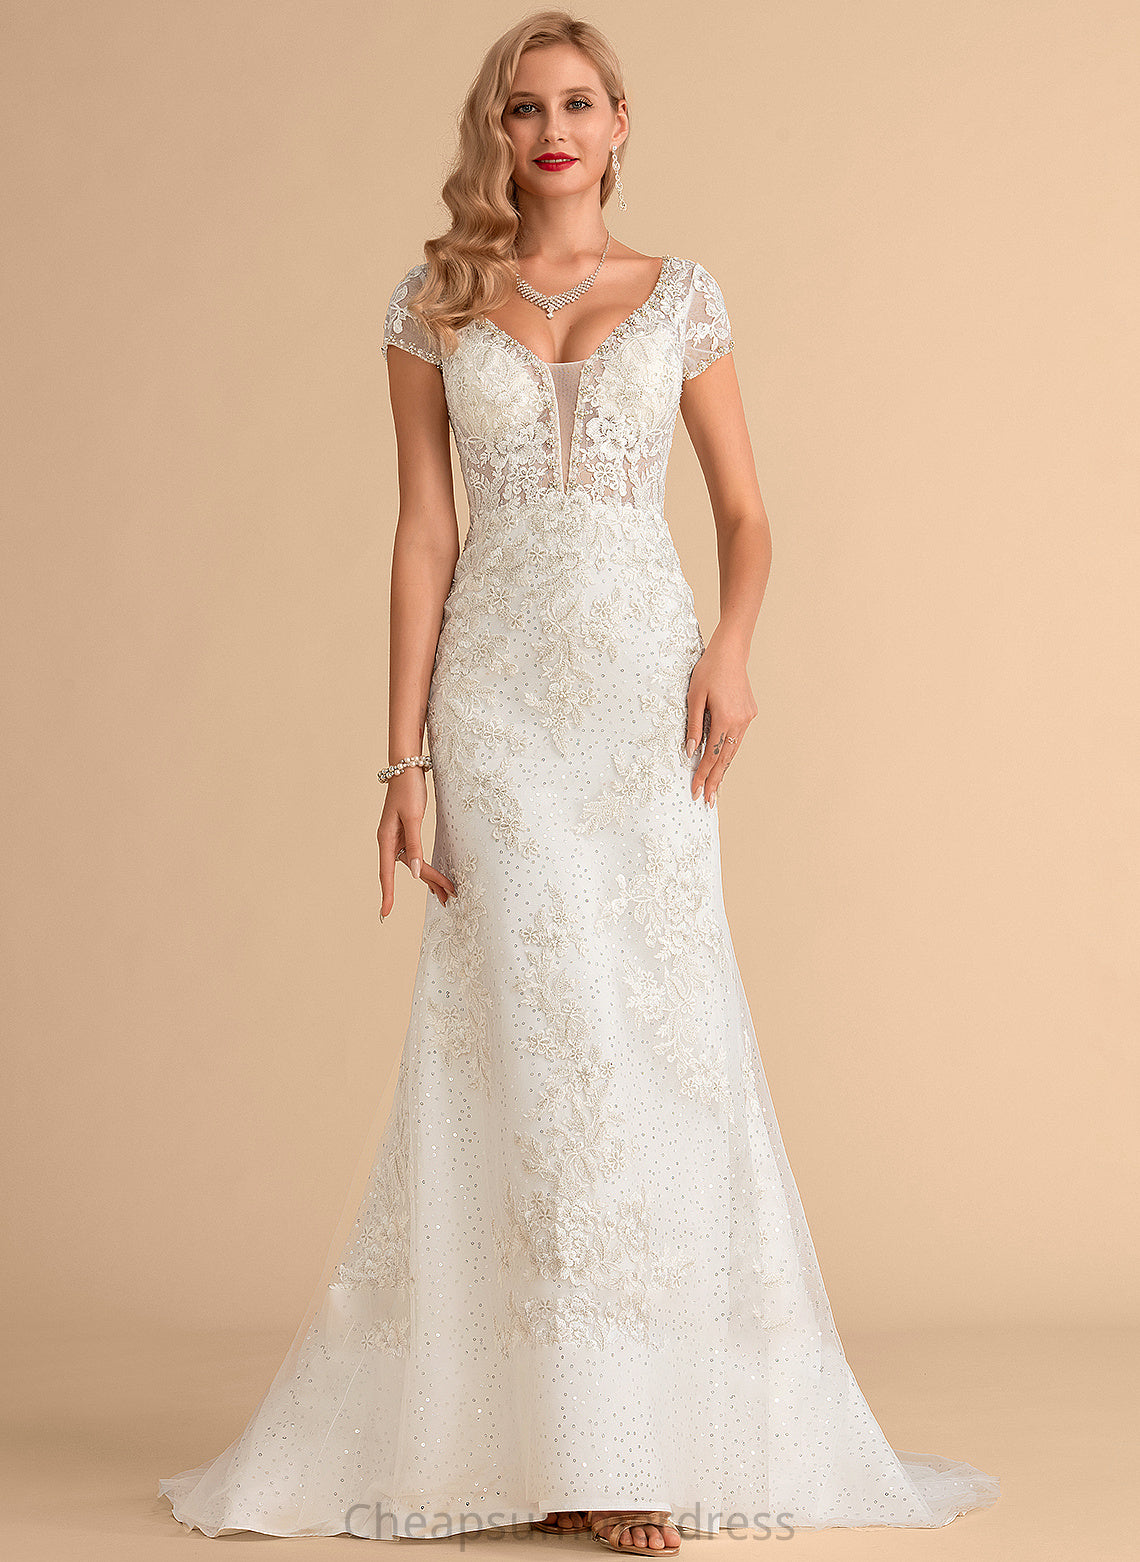 Beading Train Sequins Dress Court Wedding Dresses Lace Patricia V-neck With Wedding Tulle Trumpet/Mermaid